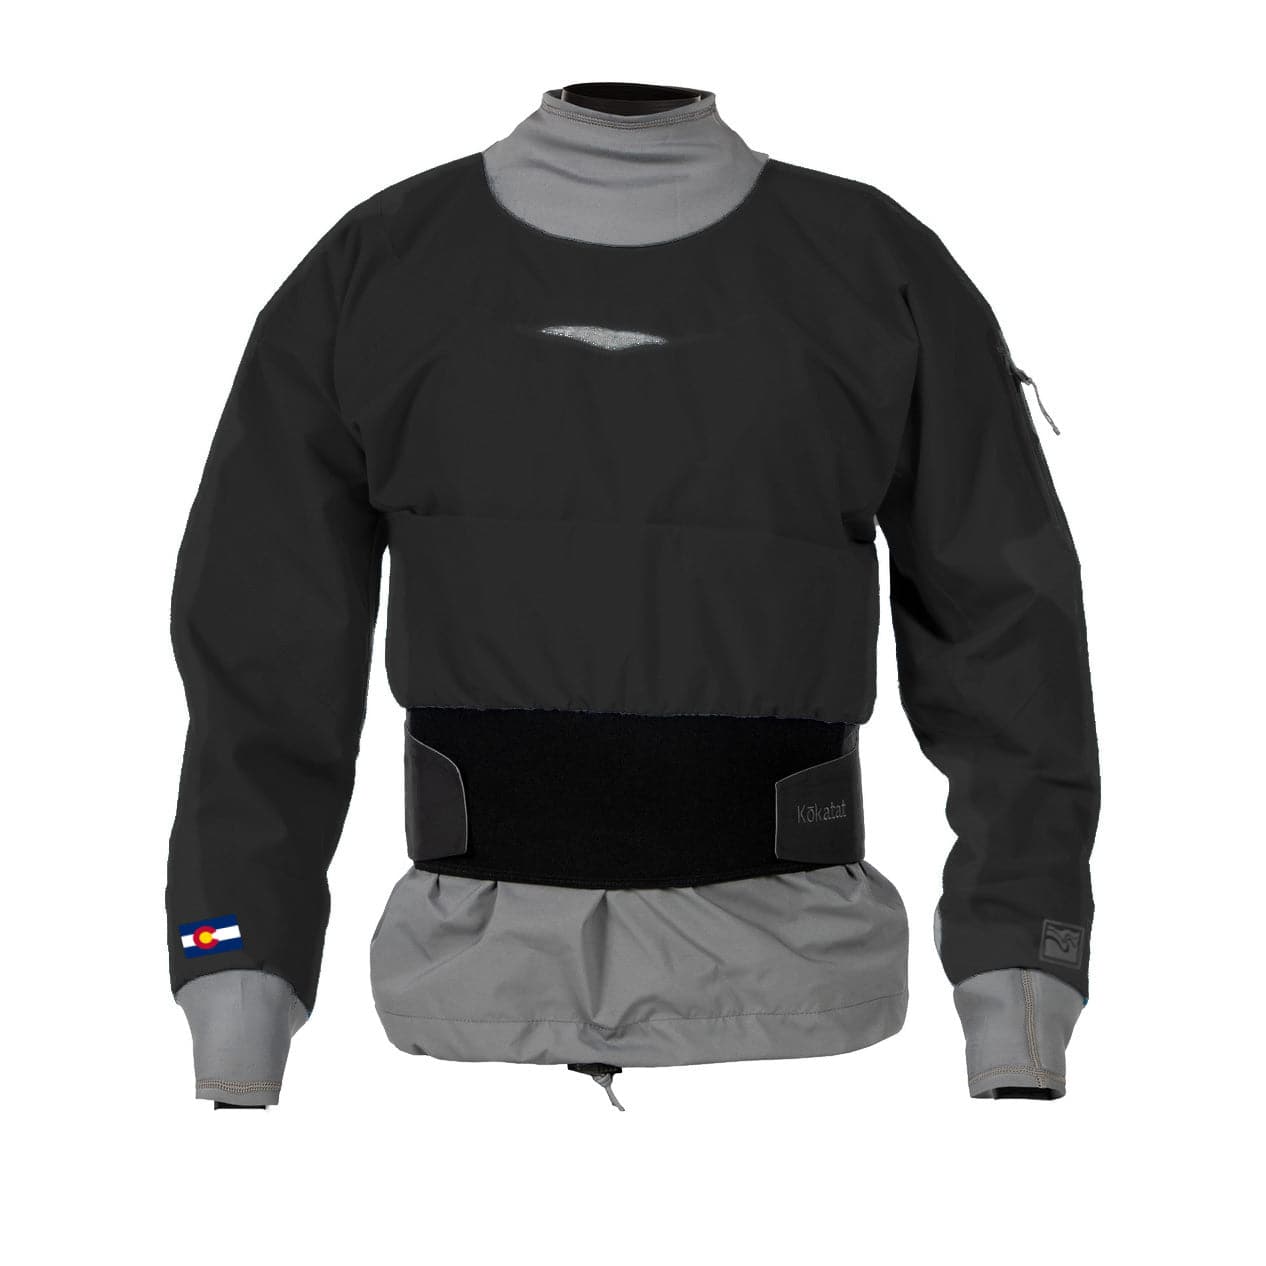 Featuring the ŌM Dry Top (GORE-TEX) men's dry wear manufactured by Kokatat shown here from a seventh angle.